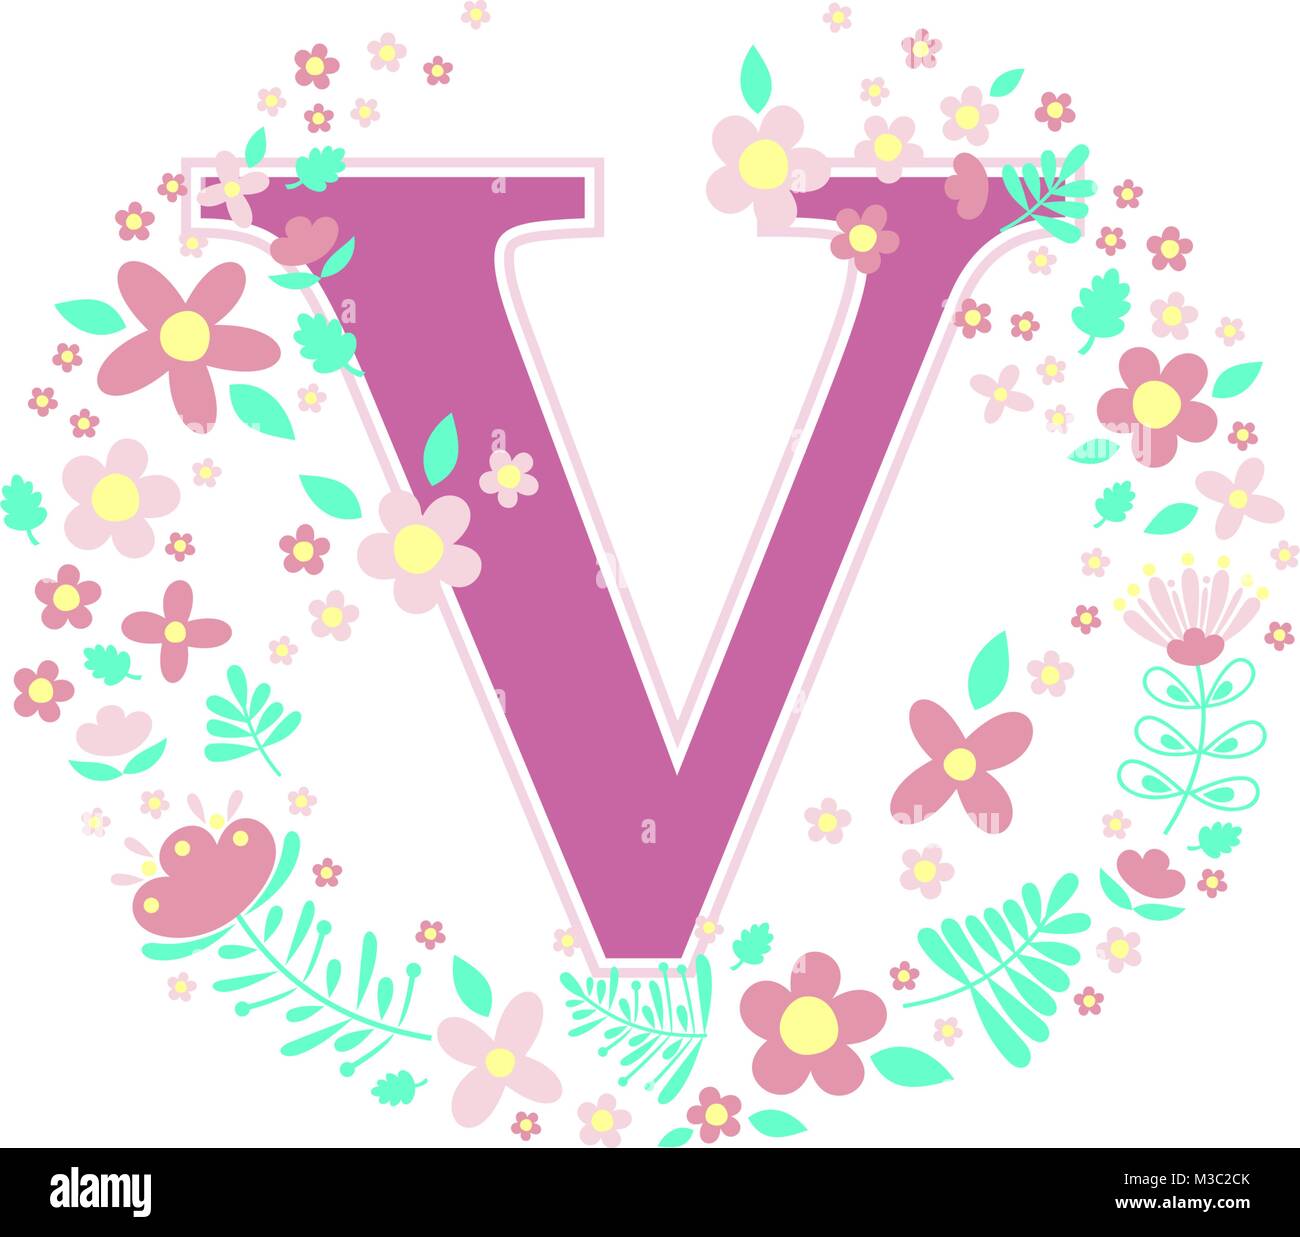 initial letter v with decorative flowers and design elements isolated on white background. can be used for baby name, nursery decoration, spring theme Stock Vector